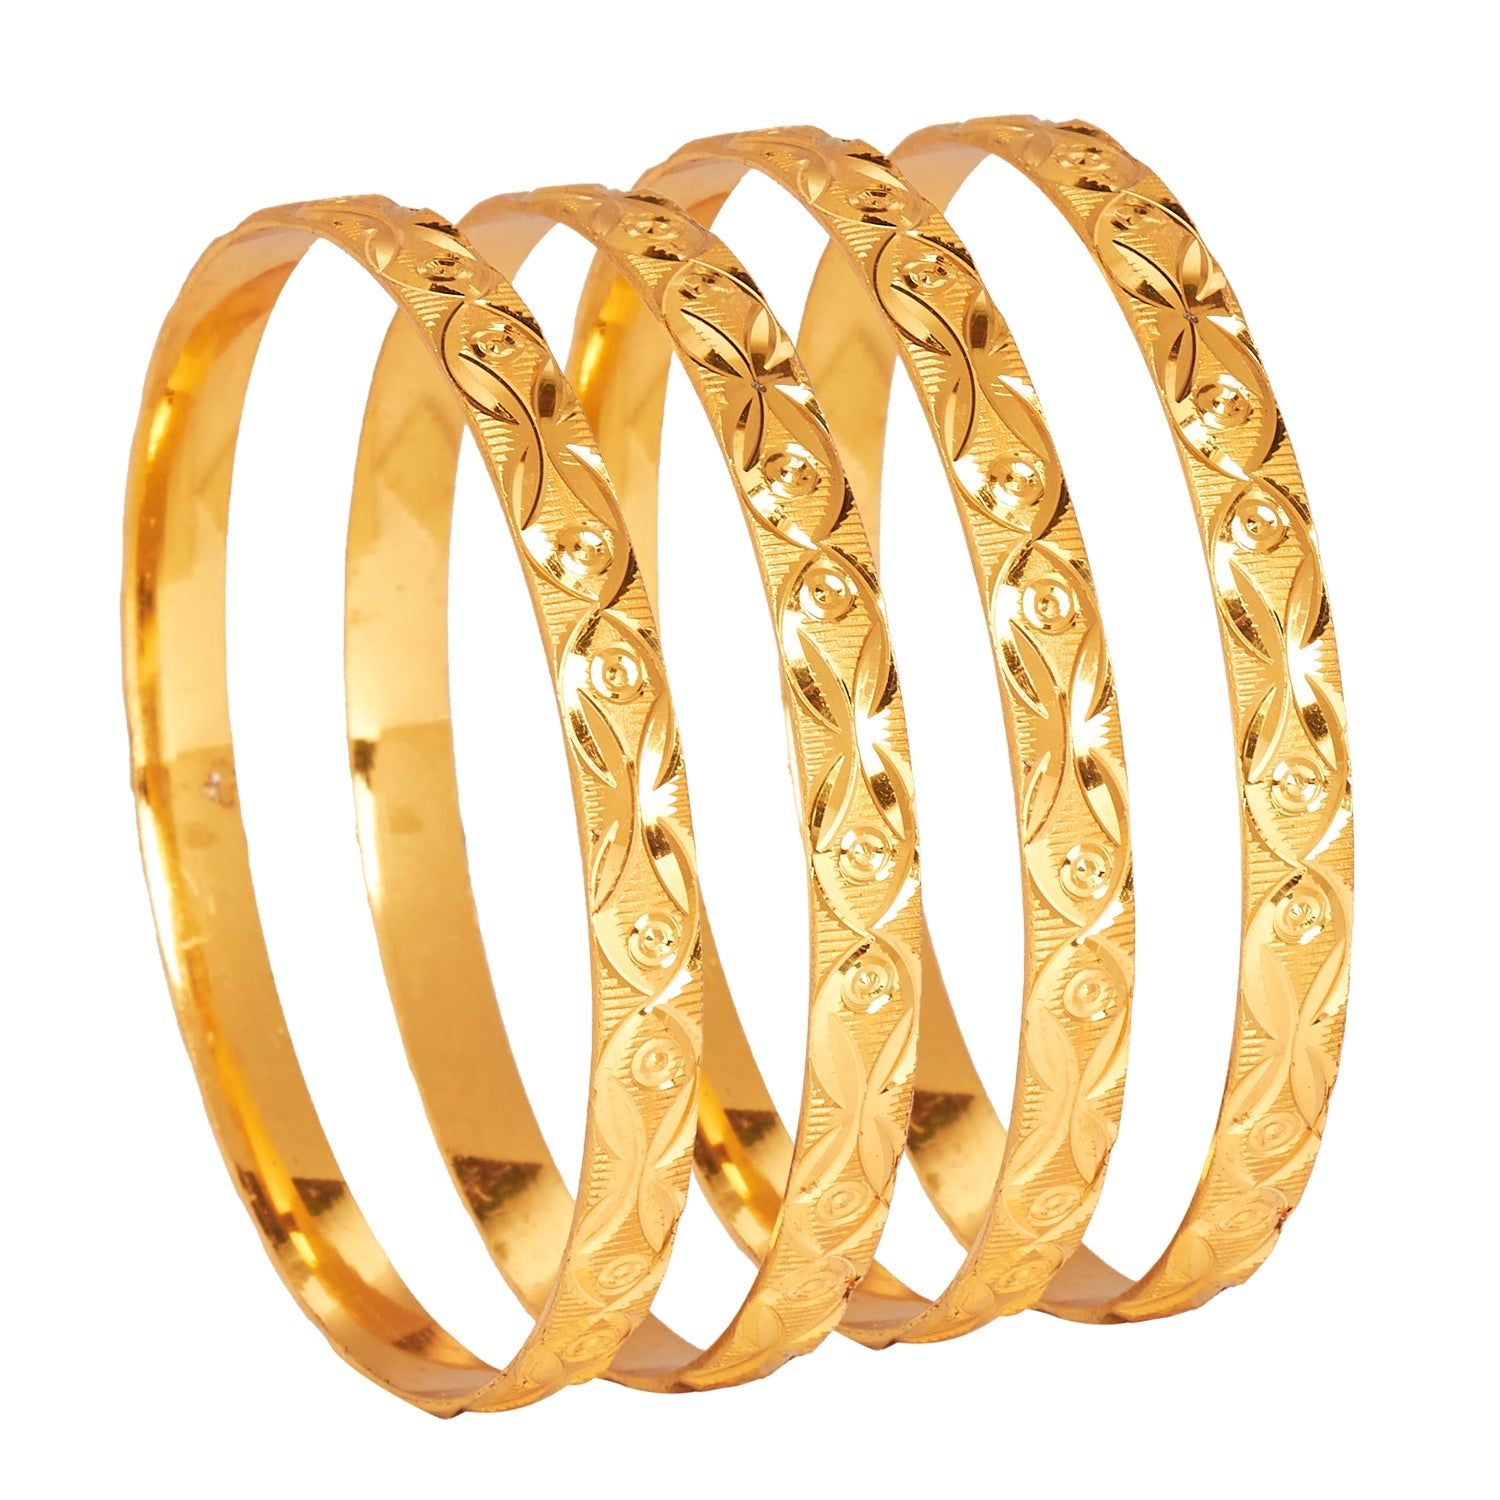 Buy Manikya City Gold Shakha White Colored Copper With 24 Carat Micro Gold  Plated Guaranteed Pair Of Bangles (Size 2.8) at Amazon.in